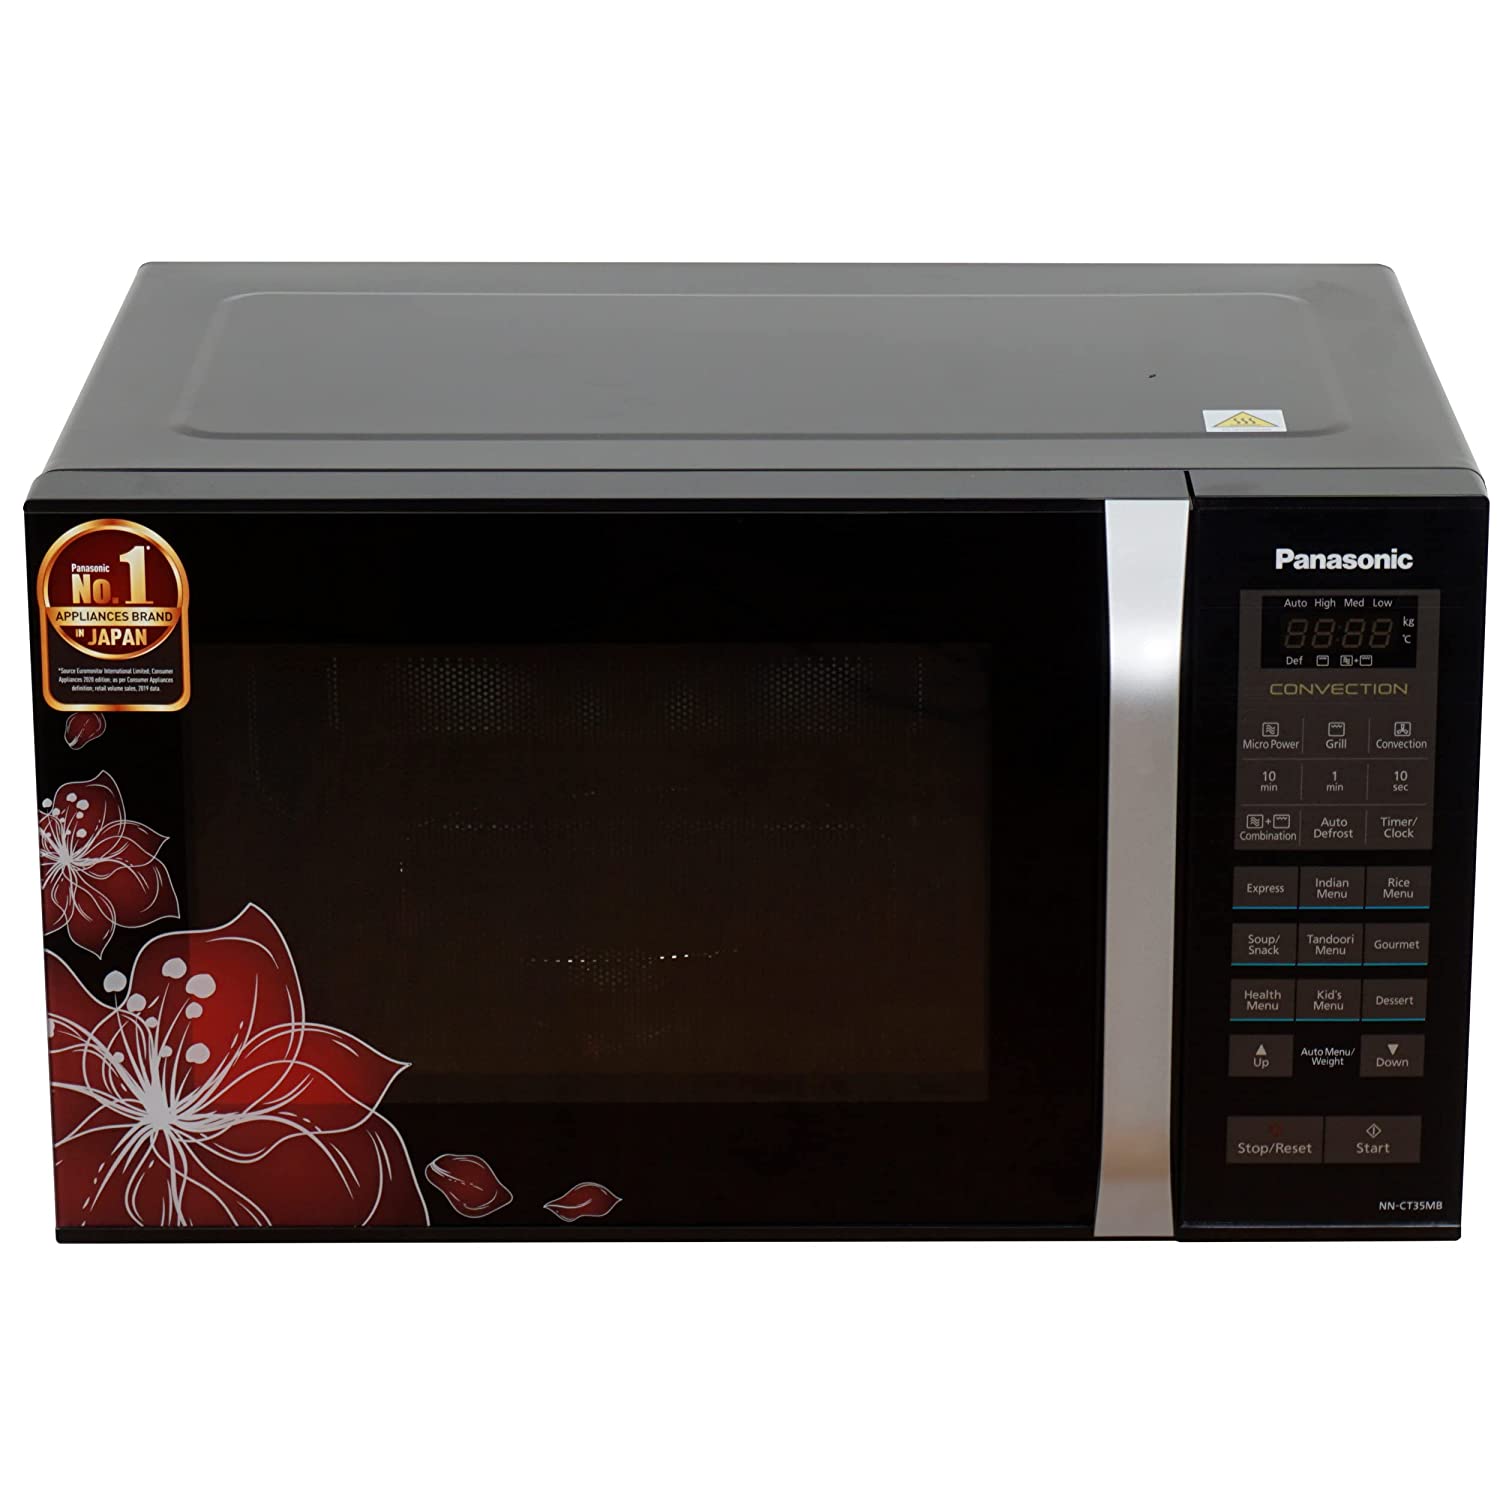 Panasonic 23 Litres Convection Microwave Oven (360° Heat Wrap, NN-CT35MBFDG, Black Floral)